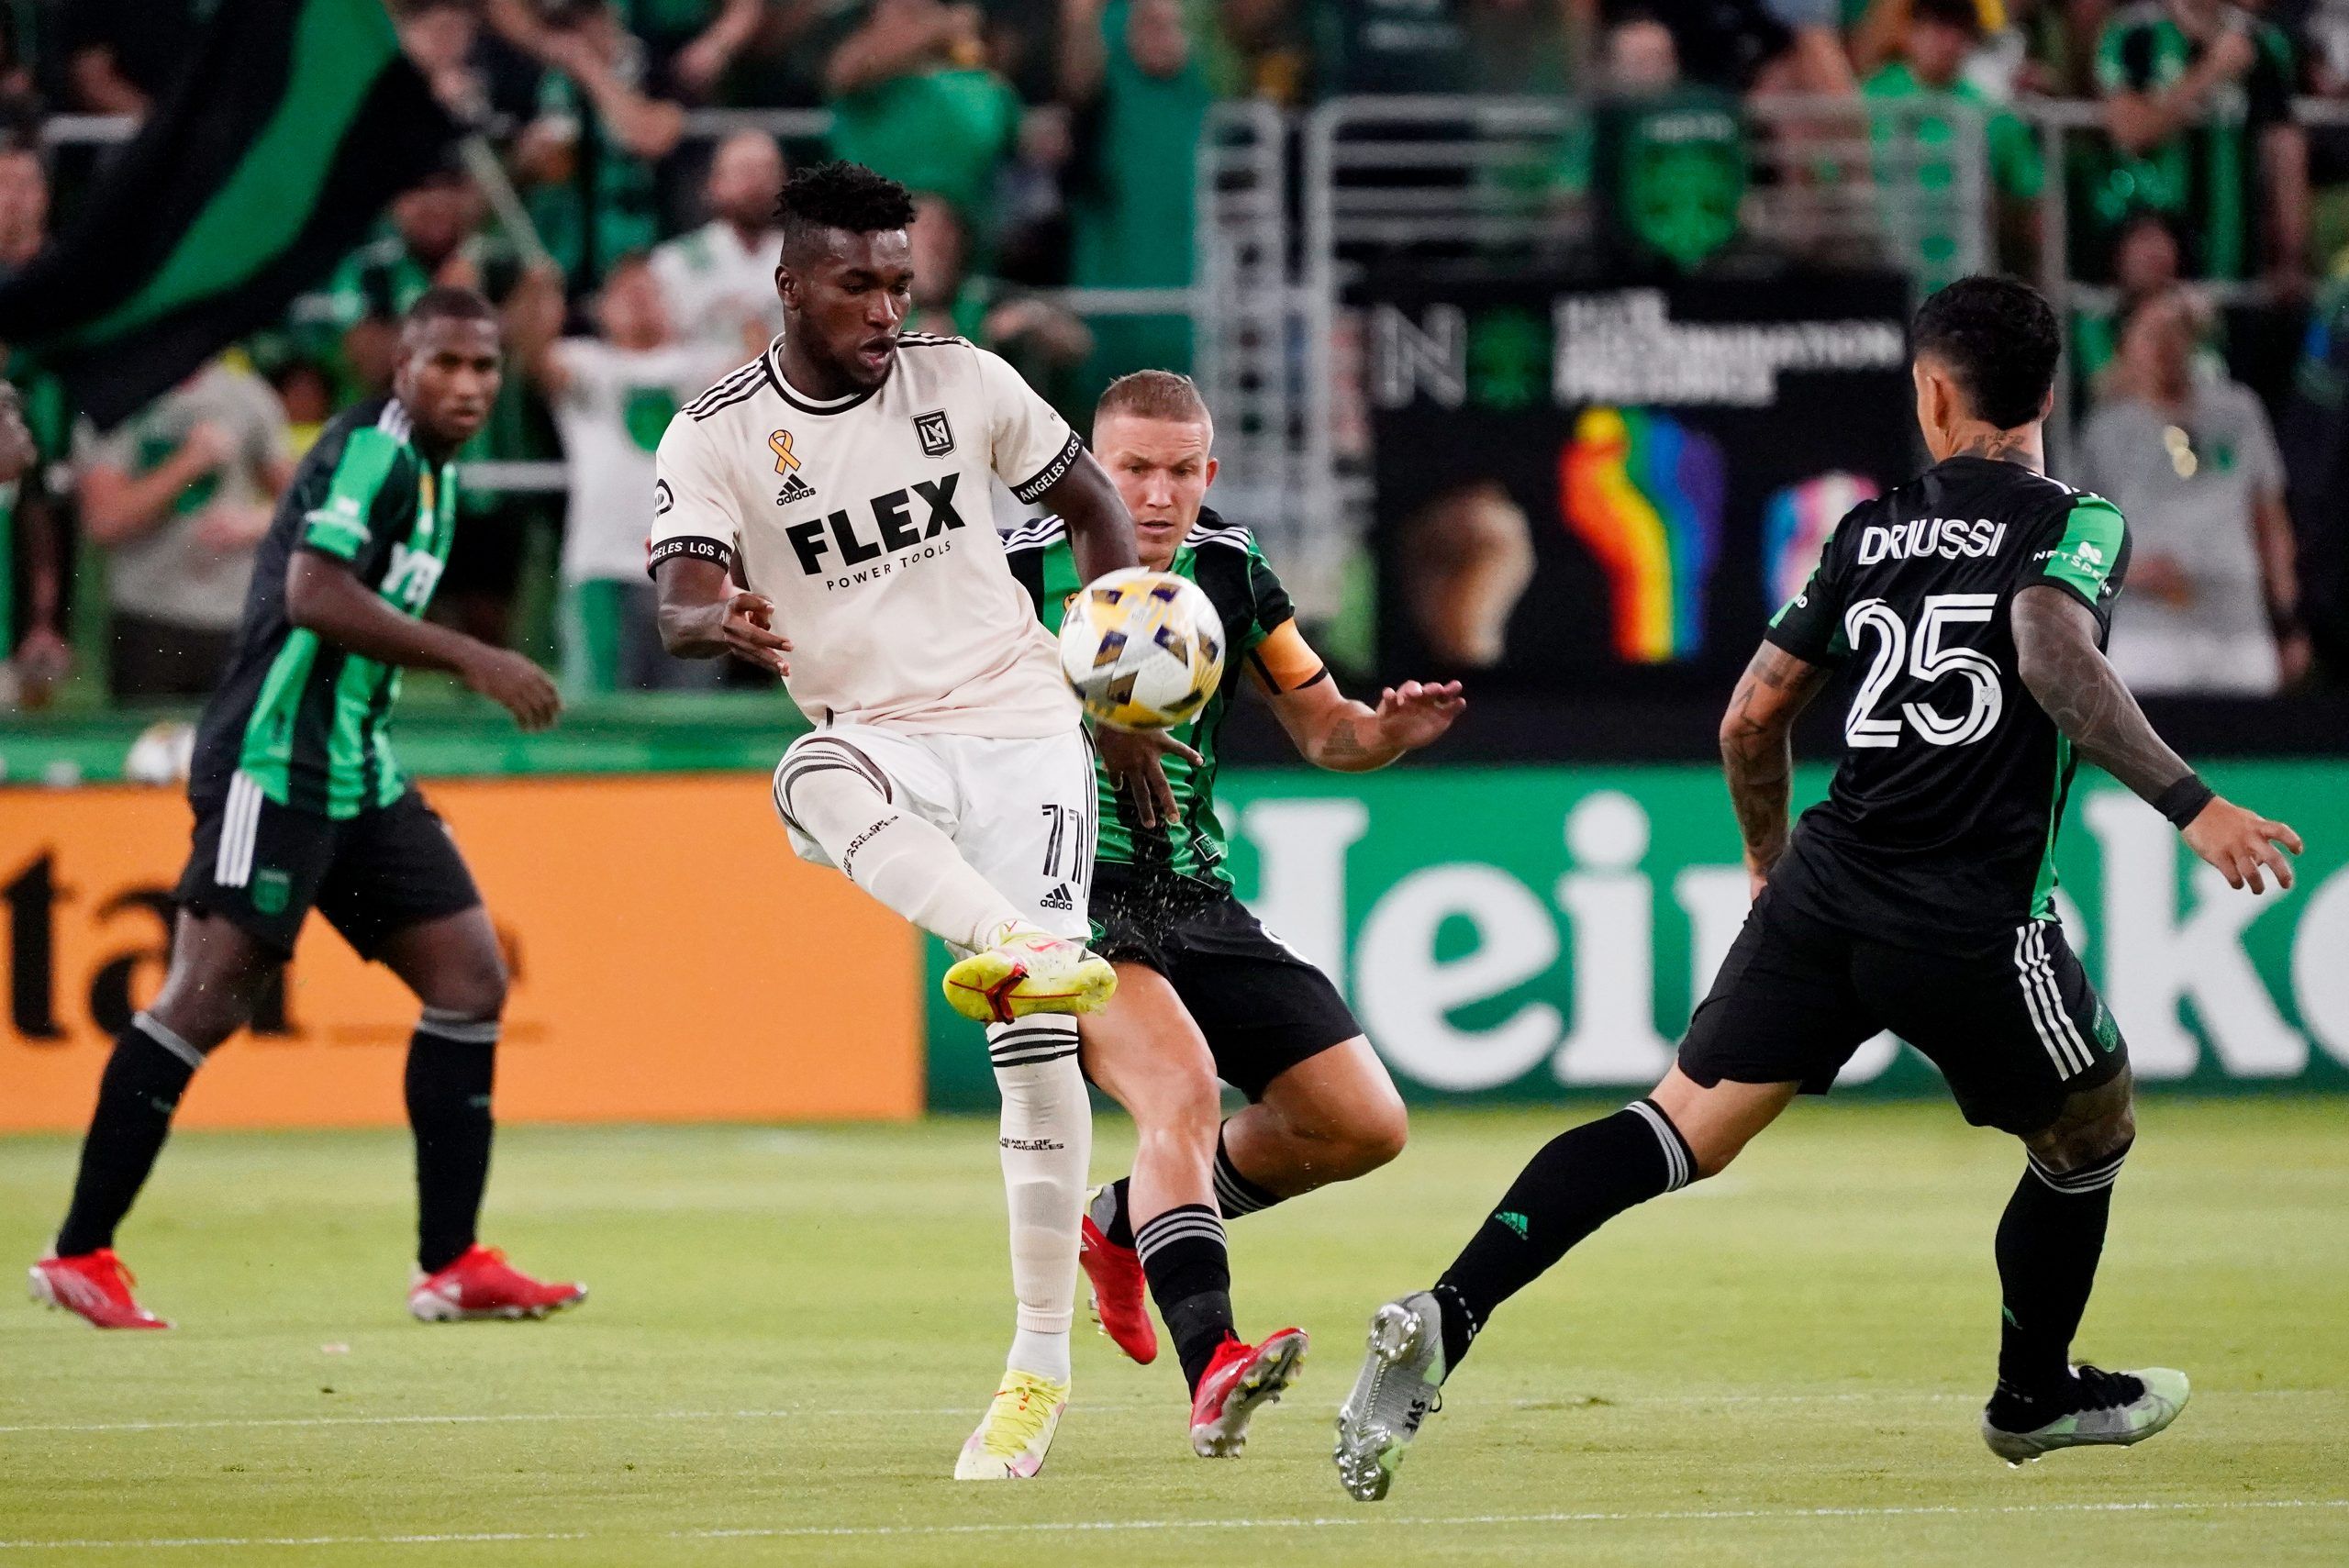 Sep 15, 2021; Austin, Texas, USA; Los Angeles FC midfielder Jose Cifuentes (11) controls the ball in front of Austin FC midfielder Alexander Ring (8) as forward Sebastian Driussi (25) closes in during the first half at Q2 Stadium. Mandatory Credit: Scott Wachter-USA TODAY Sports